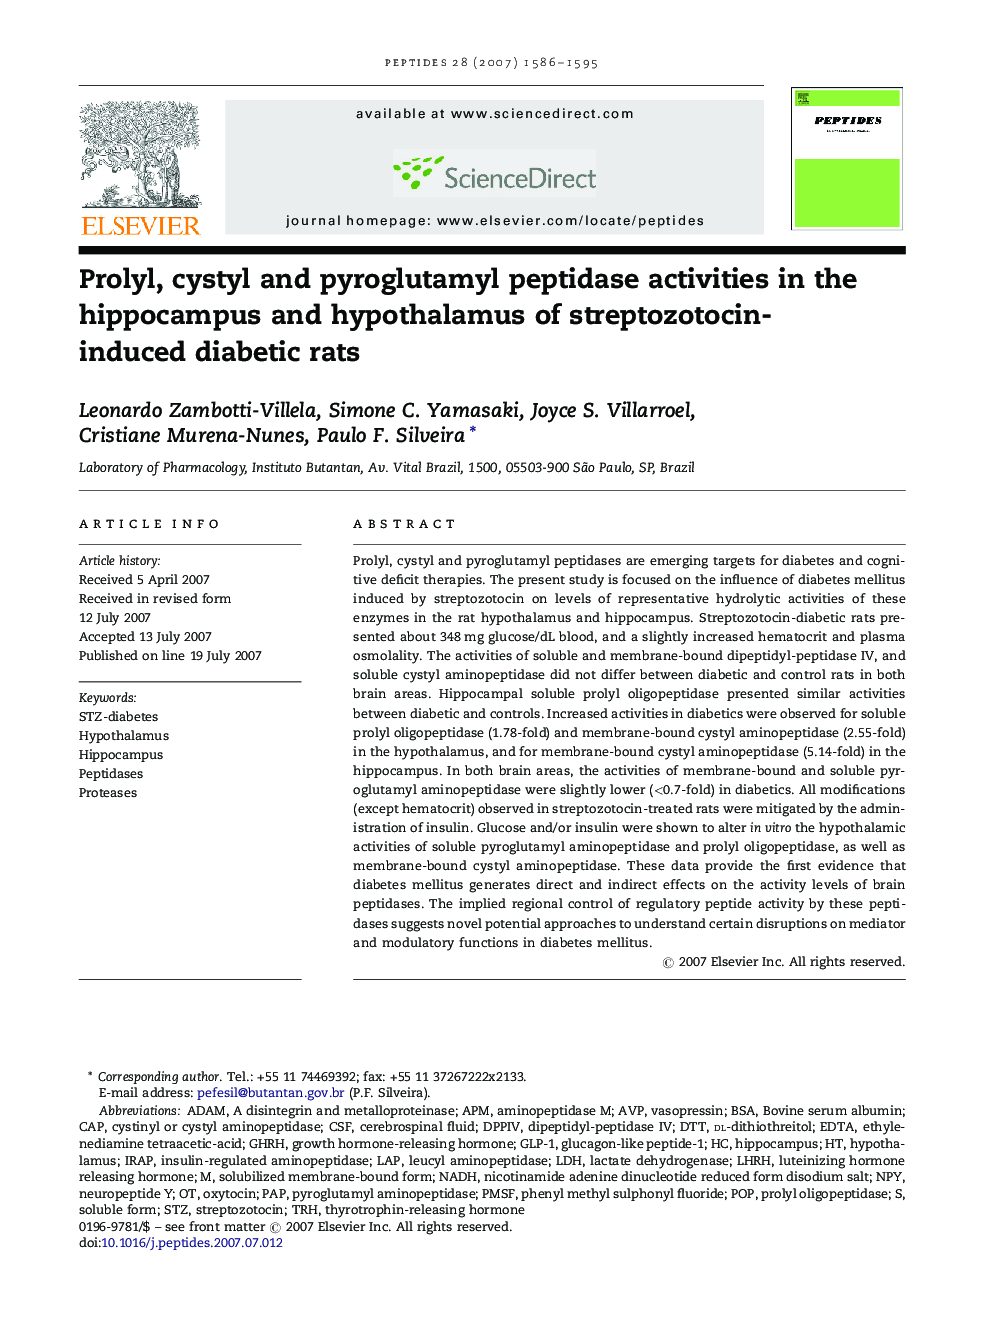 Prolyl, cystyl and pyroglutamyl peptidase activities in the hippocampus and hypothalamus of streptozotocin-induced diabetic rats